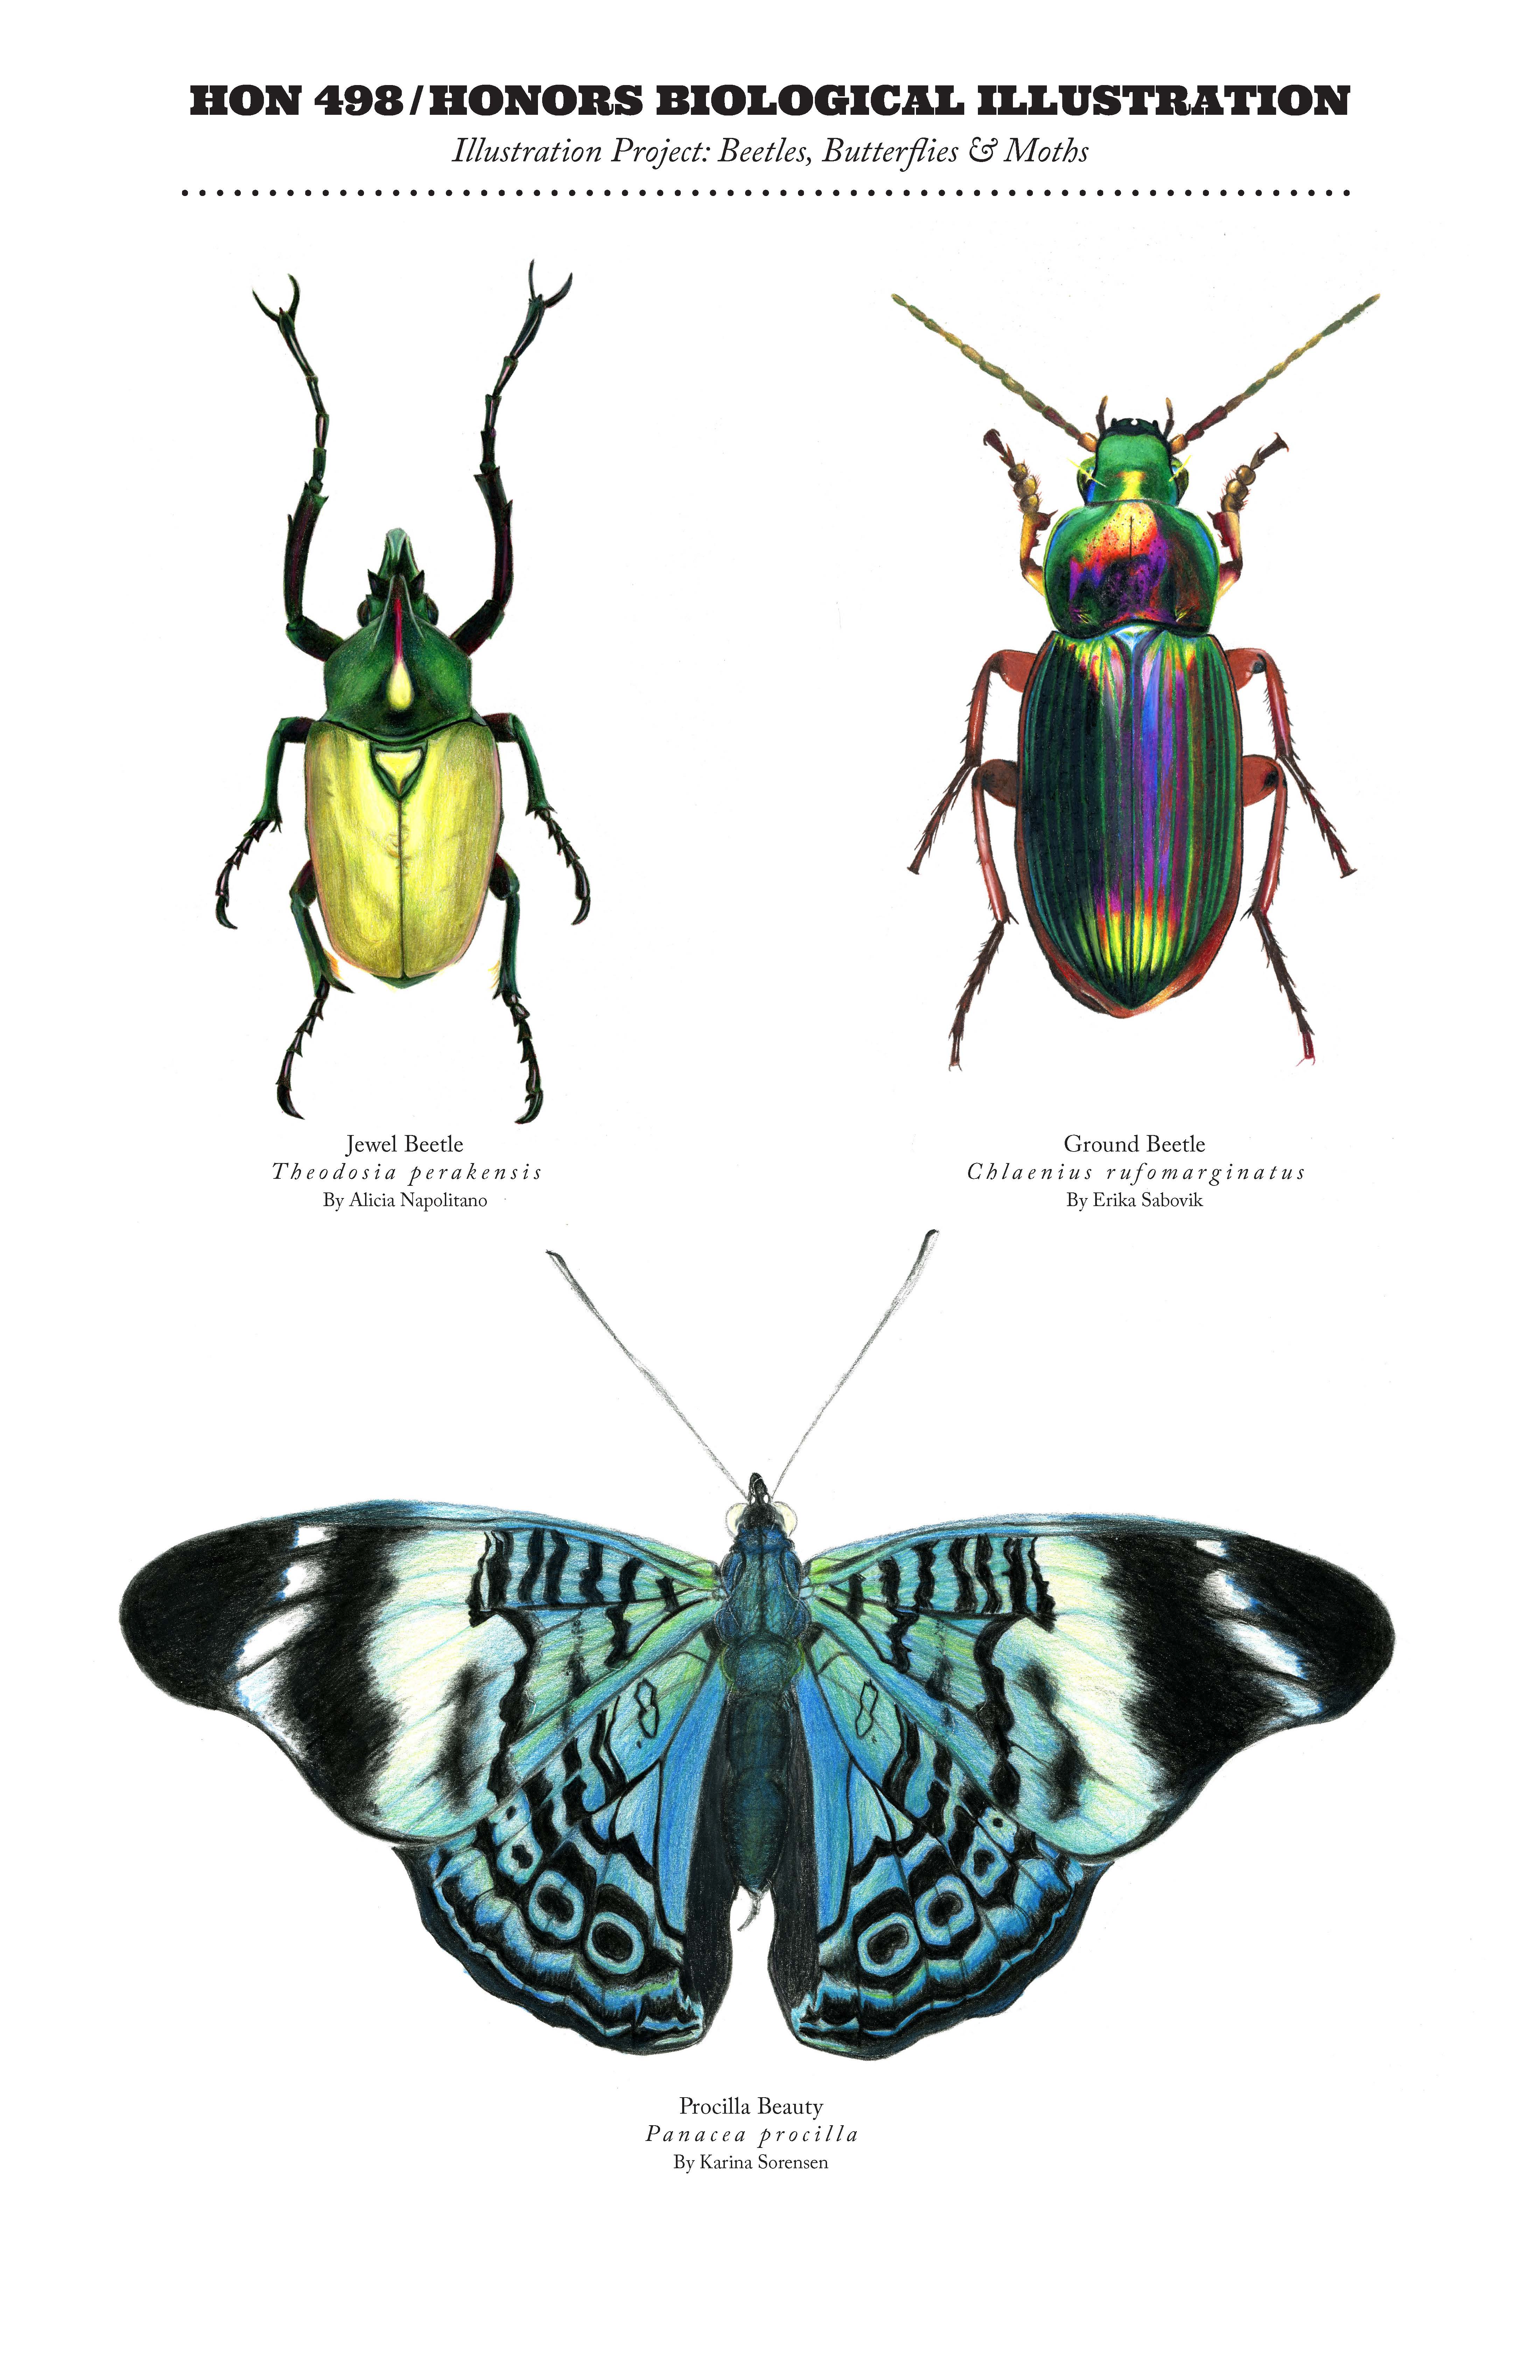 Drawings for Biological Illustration course. On the top left is a green and yellow beetle, and there is a rainbow-colored beetle on the top right. There is a black and blue butterfly on the bottom.